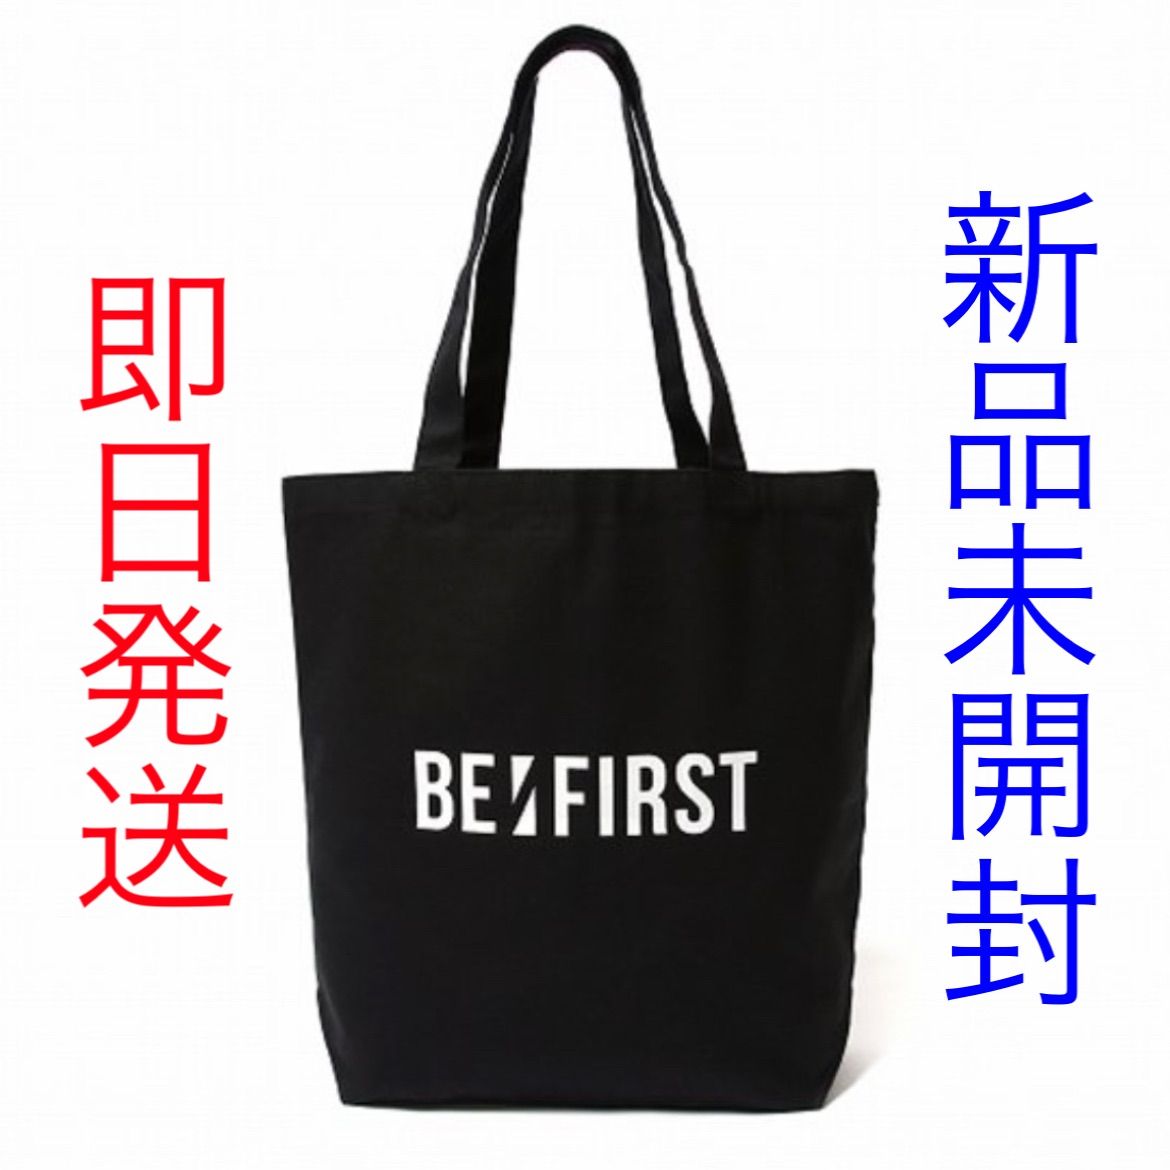 BE:FIRST ビーファースト ロゴ トートバッグ 初期グッズ - タレントグッズ